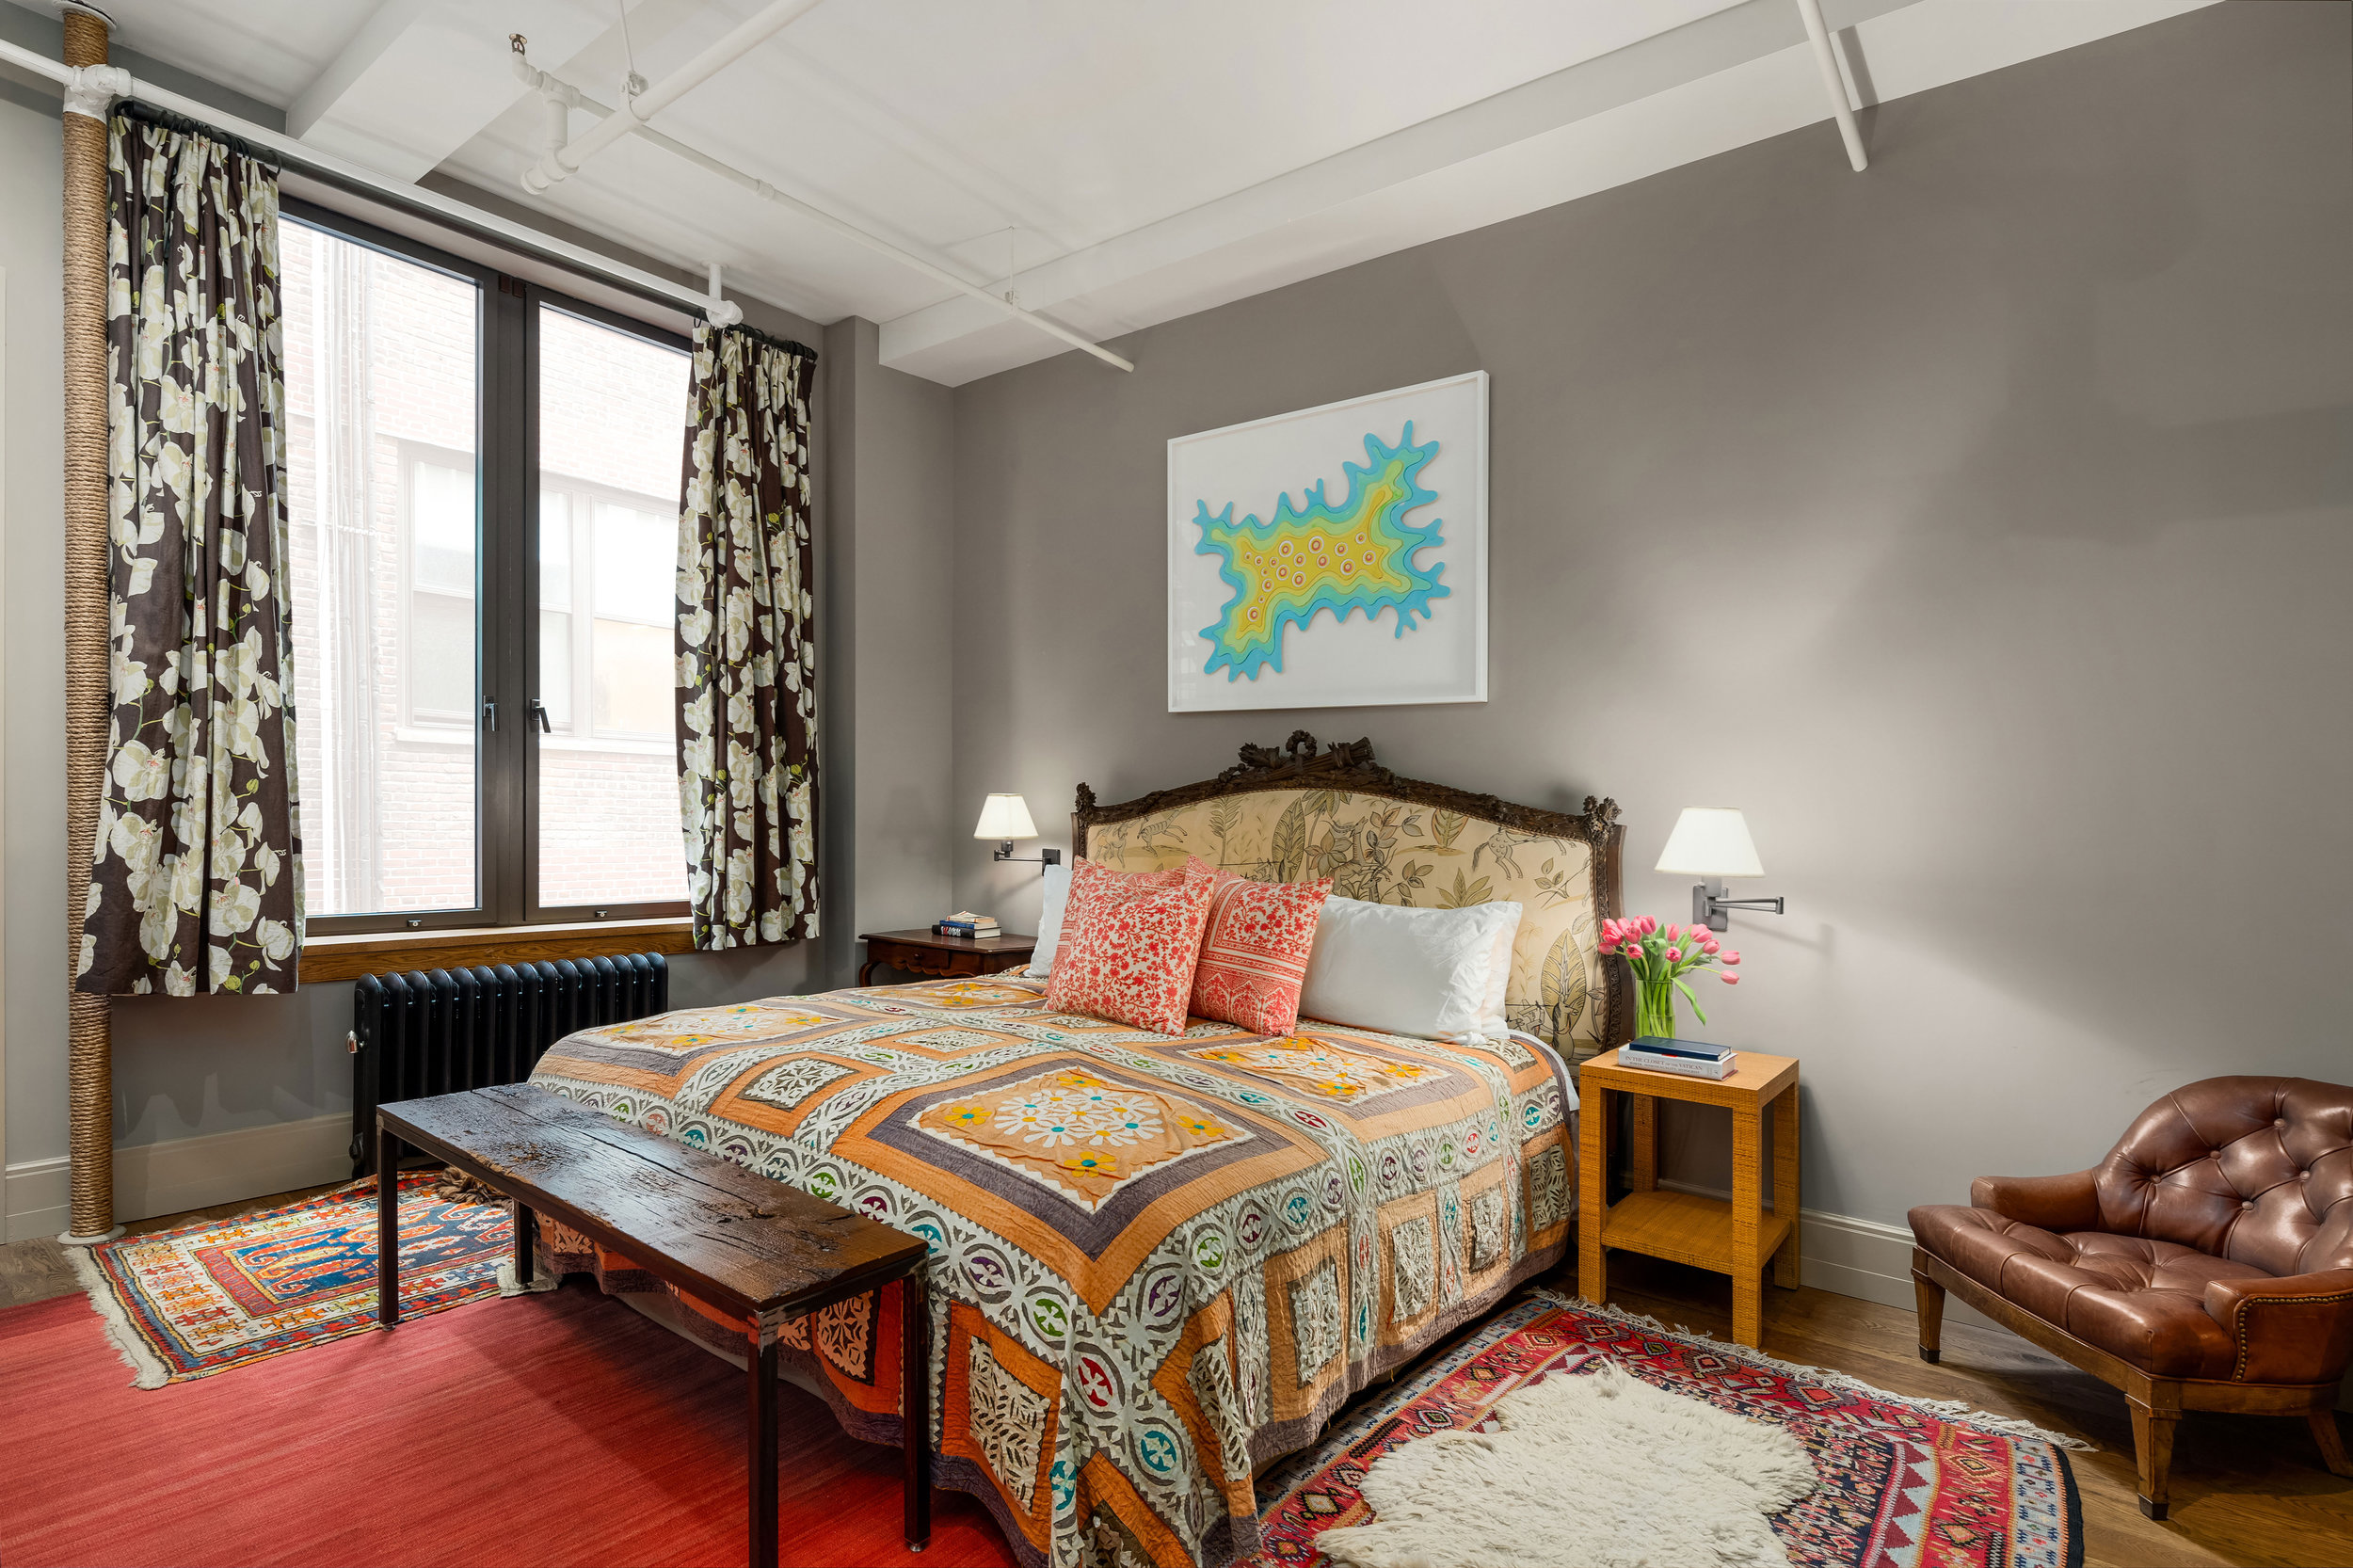 142West26thStreet9-ChelseaNewYork_Holly_Parker_DouglasElliman_Photography_79380384_high_res.jpg